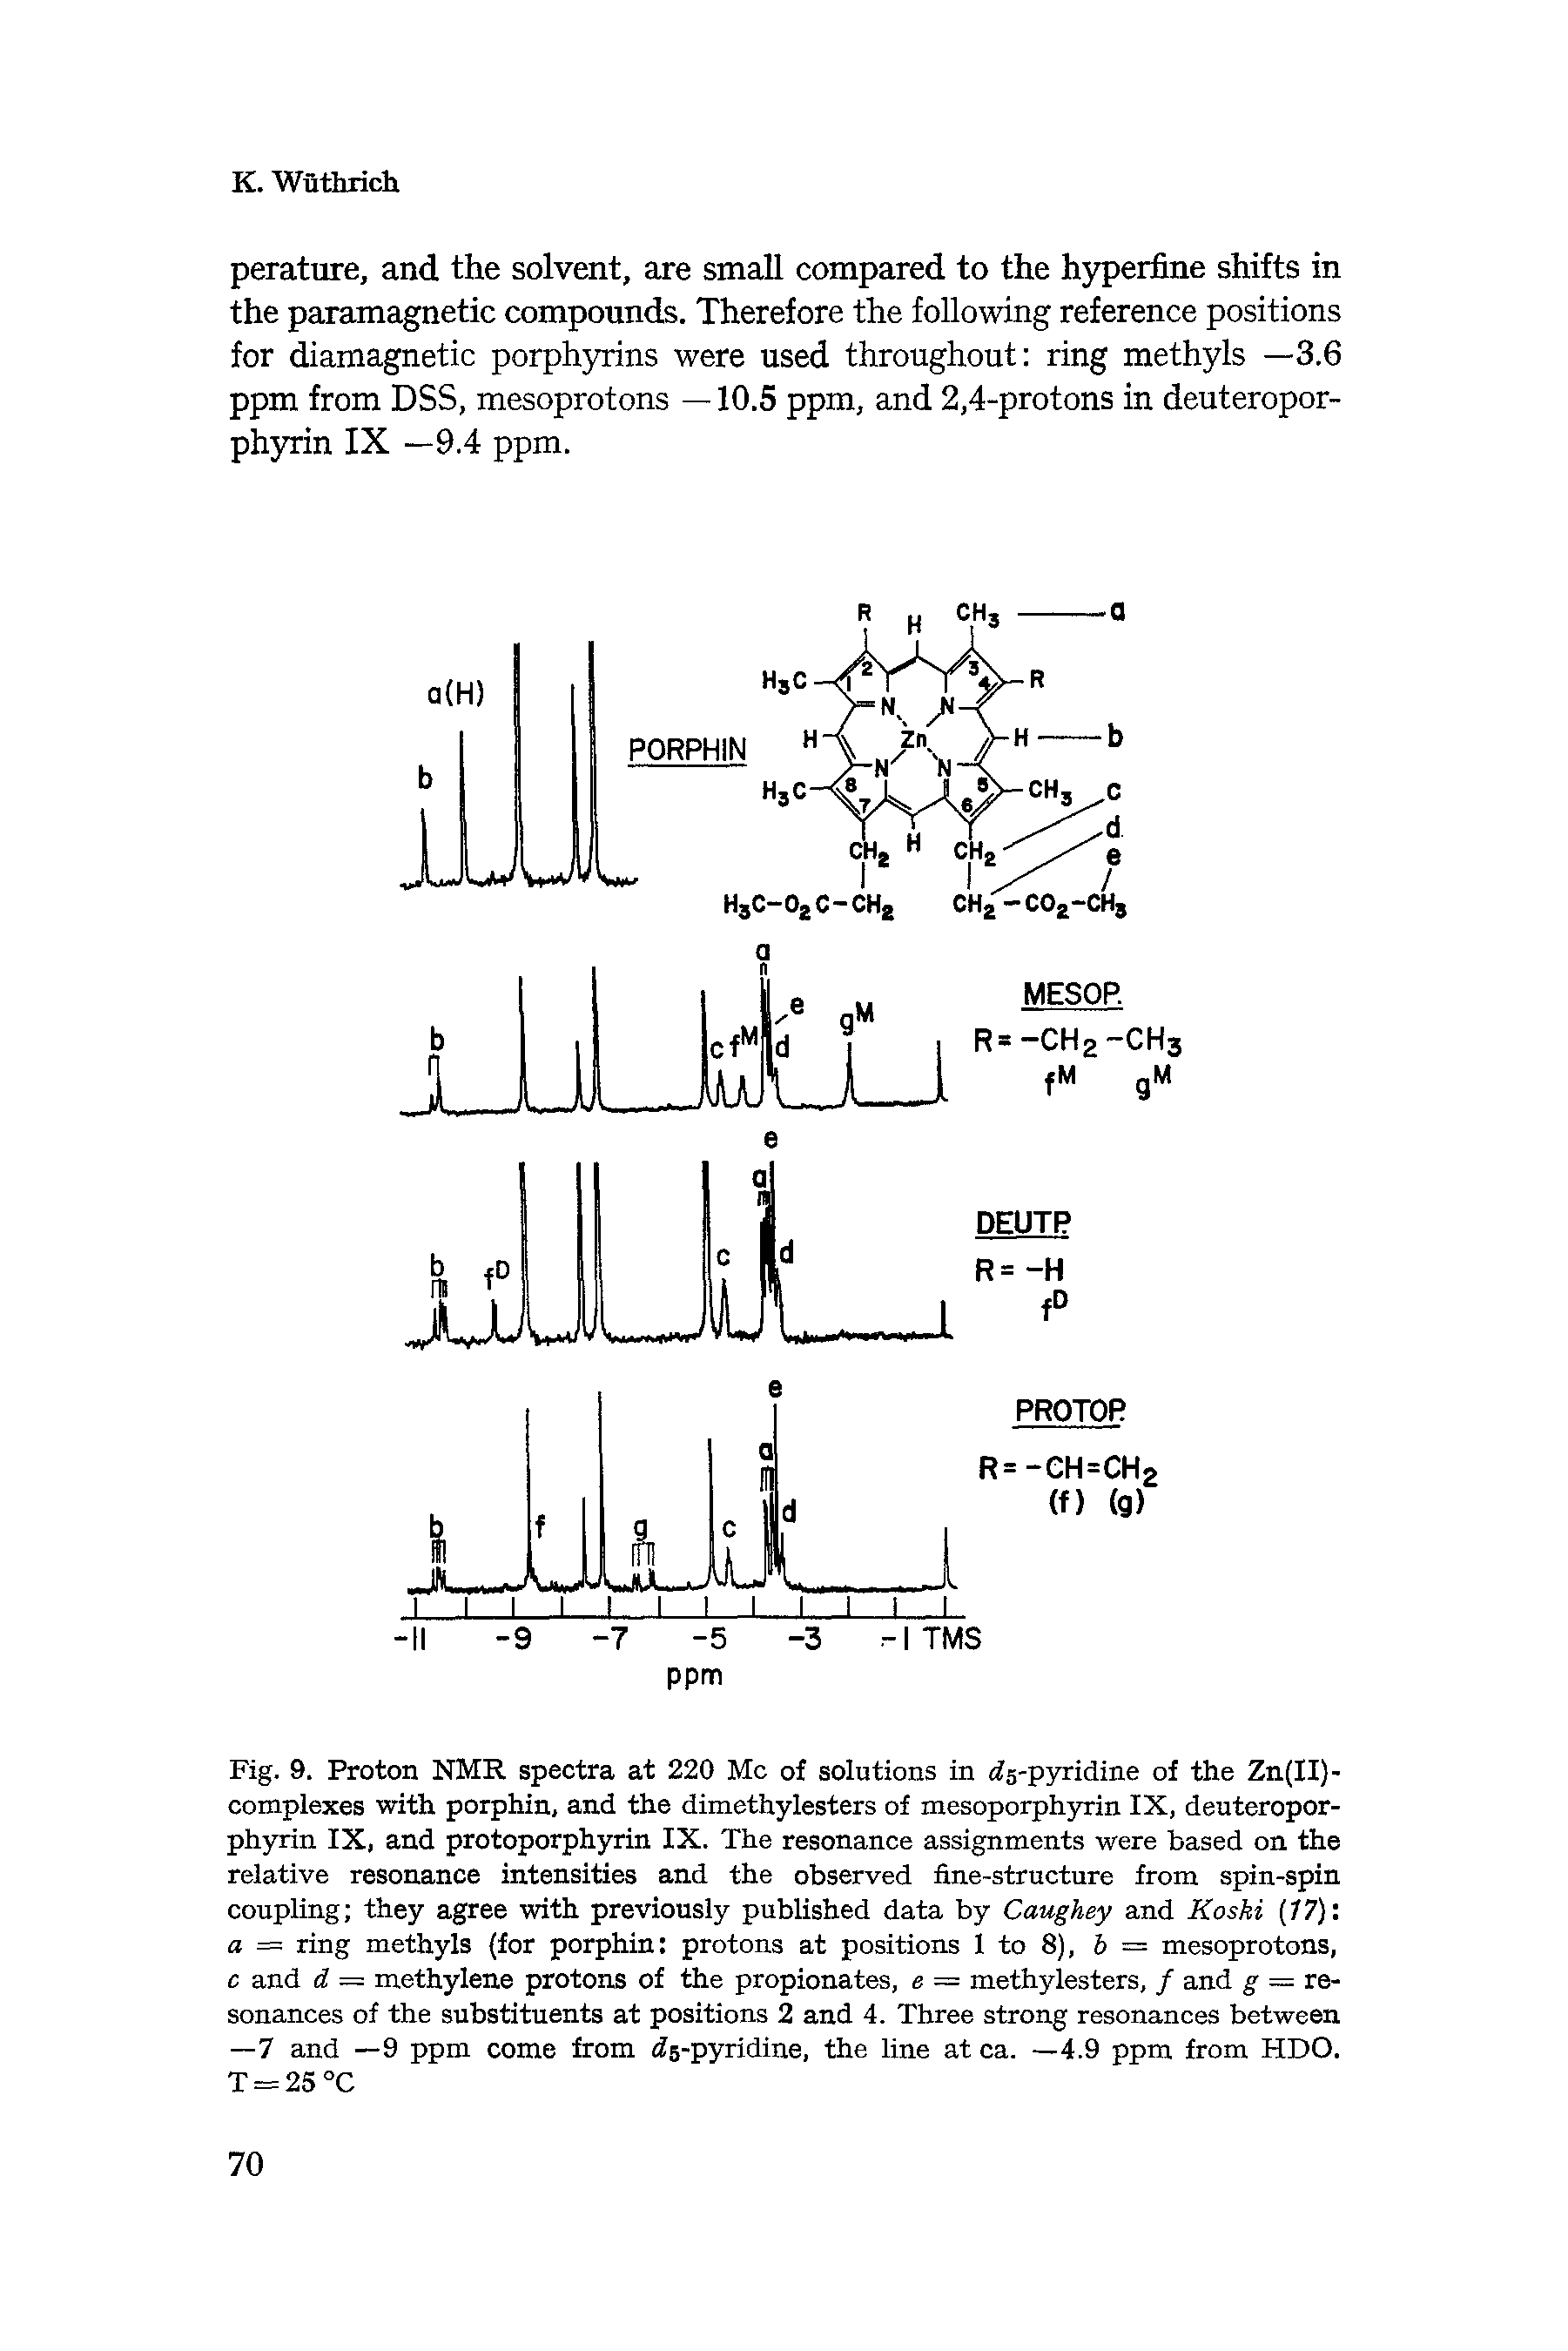 Fig. 9. Proton NMR spectra at 220 Me of solutions in d5-pyridine of the Zn(II)-complexes with porphin, and the dimethylesters of mesoporphyrin IX, deuteropor-phyrin IX, and protoporphyrin IX. The resonance assignments were based on the relative resonance intensities and the observed fine-structure from spin-spin coupling they agree with previously published data by Caughey and Koski (17 a = ring methyls (for porphin protons at positions 1 to 8), b = mesoprotons, c and d = methylene protons of the propionates, e = methylesters, / and g = resonances of the substituents at positions 2 and 4. Three strong resonances between —7 and —9 ppm come from d5-pyridine, the line at ca. —4.9 ppm from HDO. T = 25 °C...